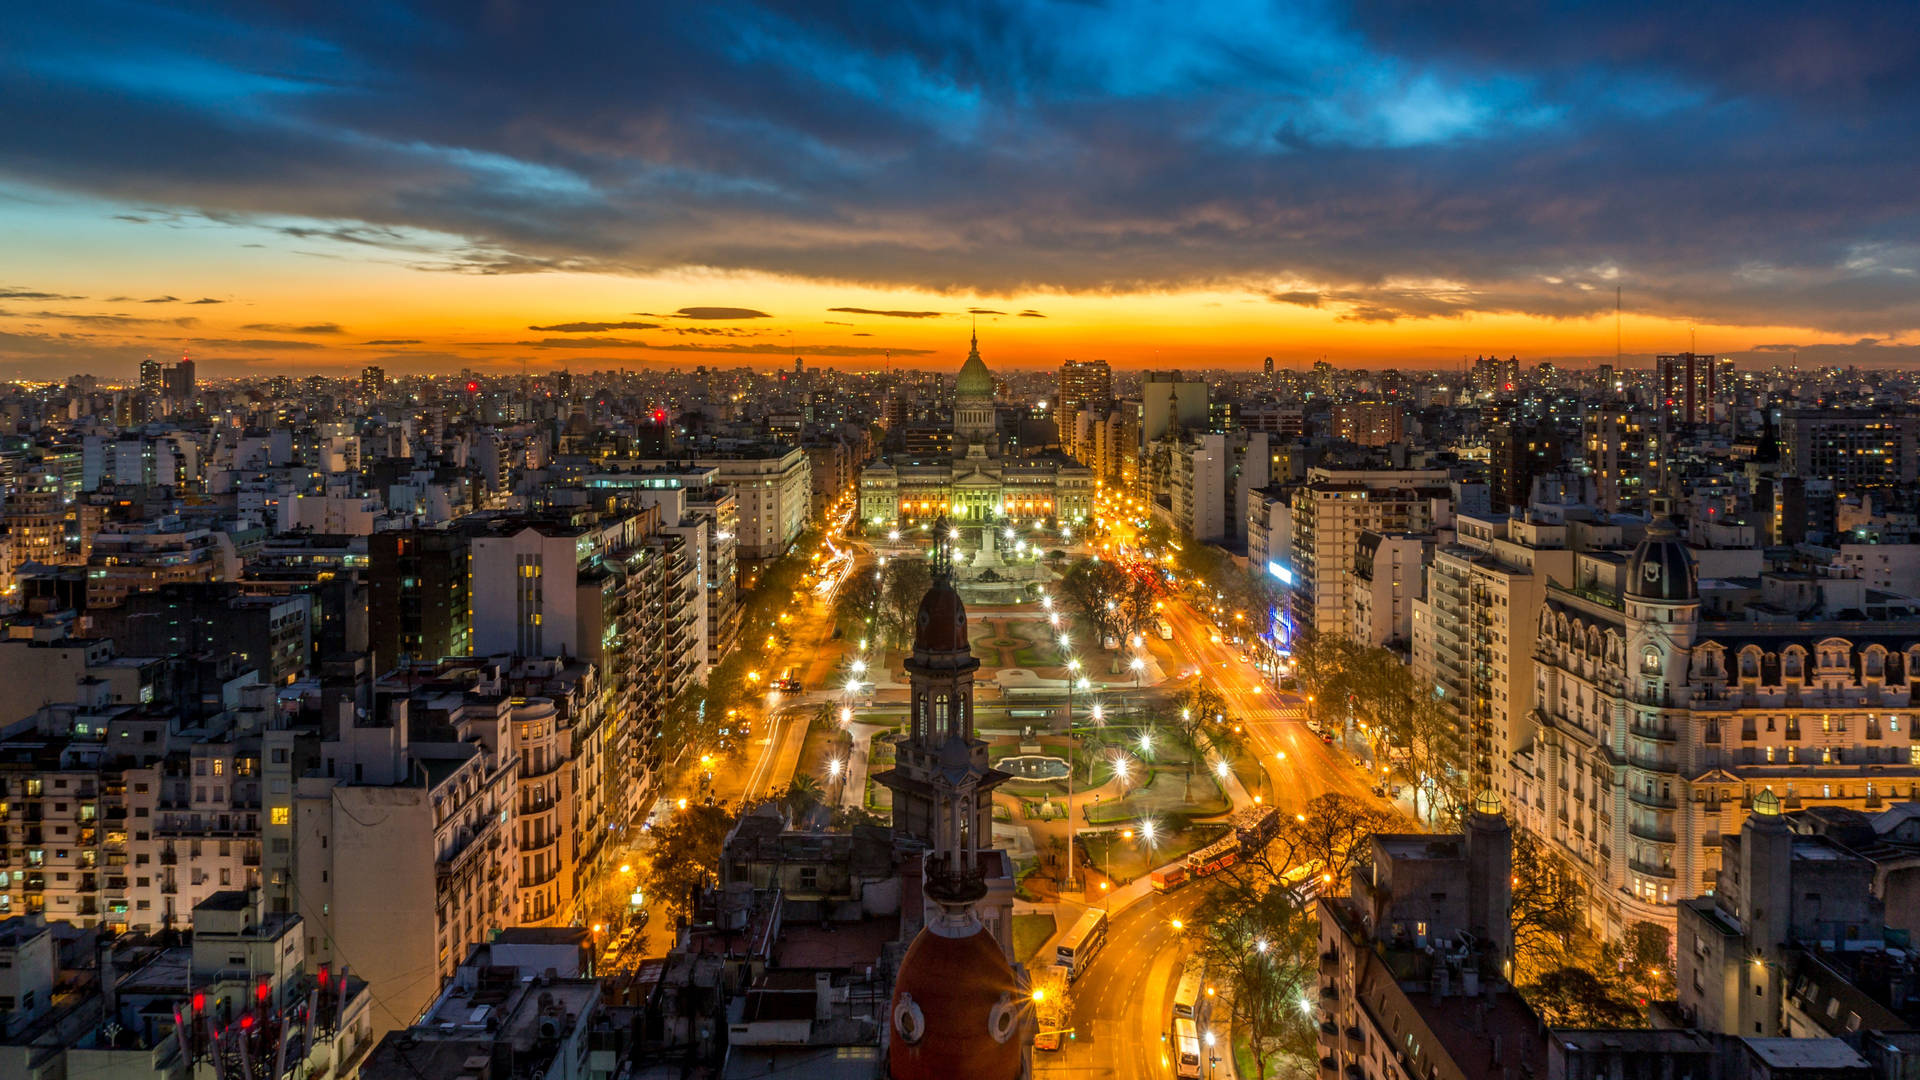 Dusk Descends On The Beautiful Buenos Aires Cityscape. Background